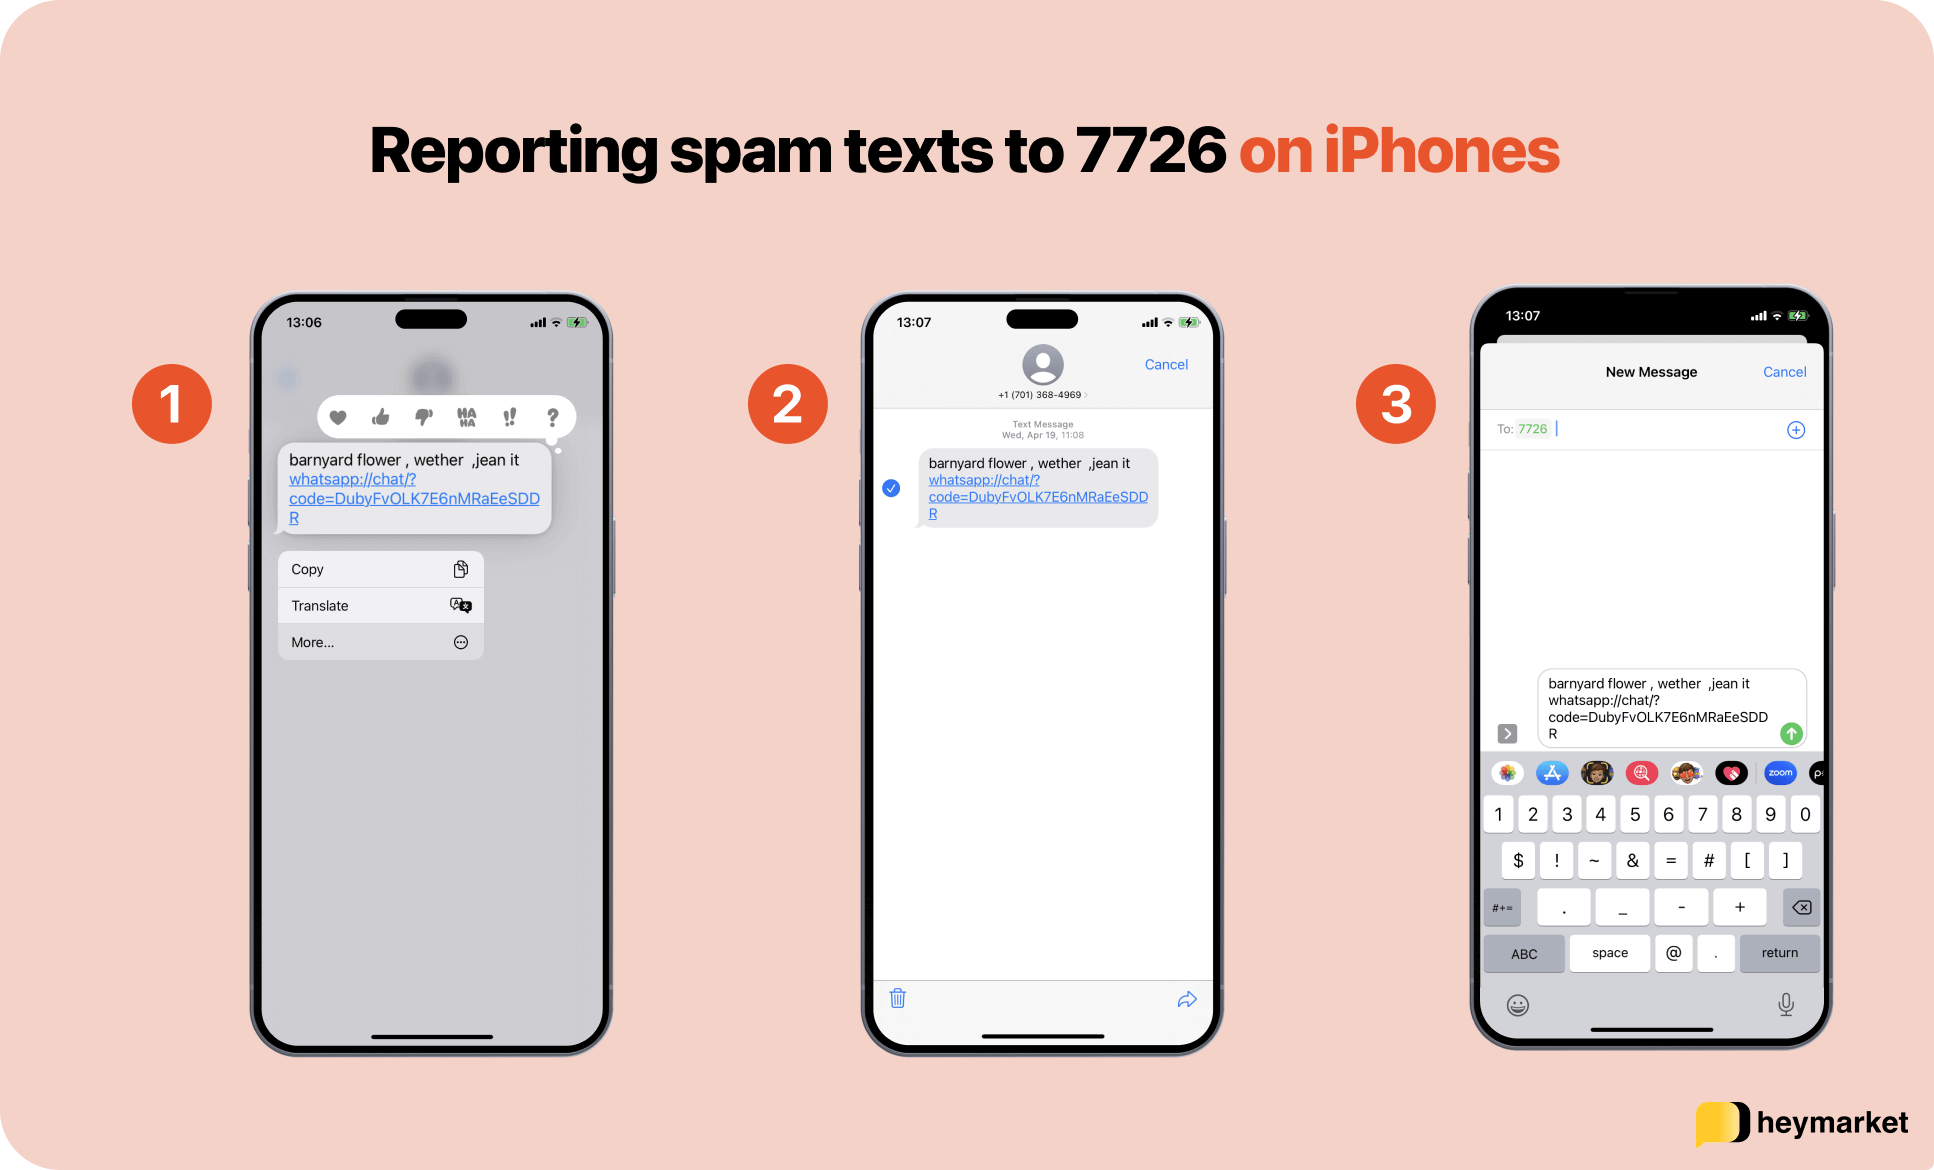 Steps for reporting spam text on iPhone